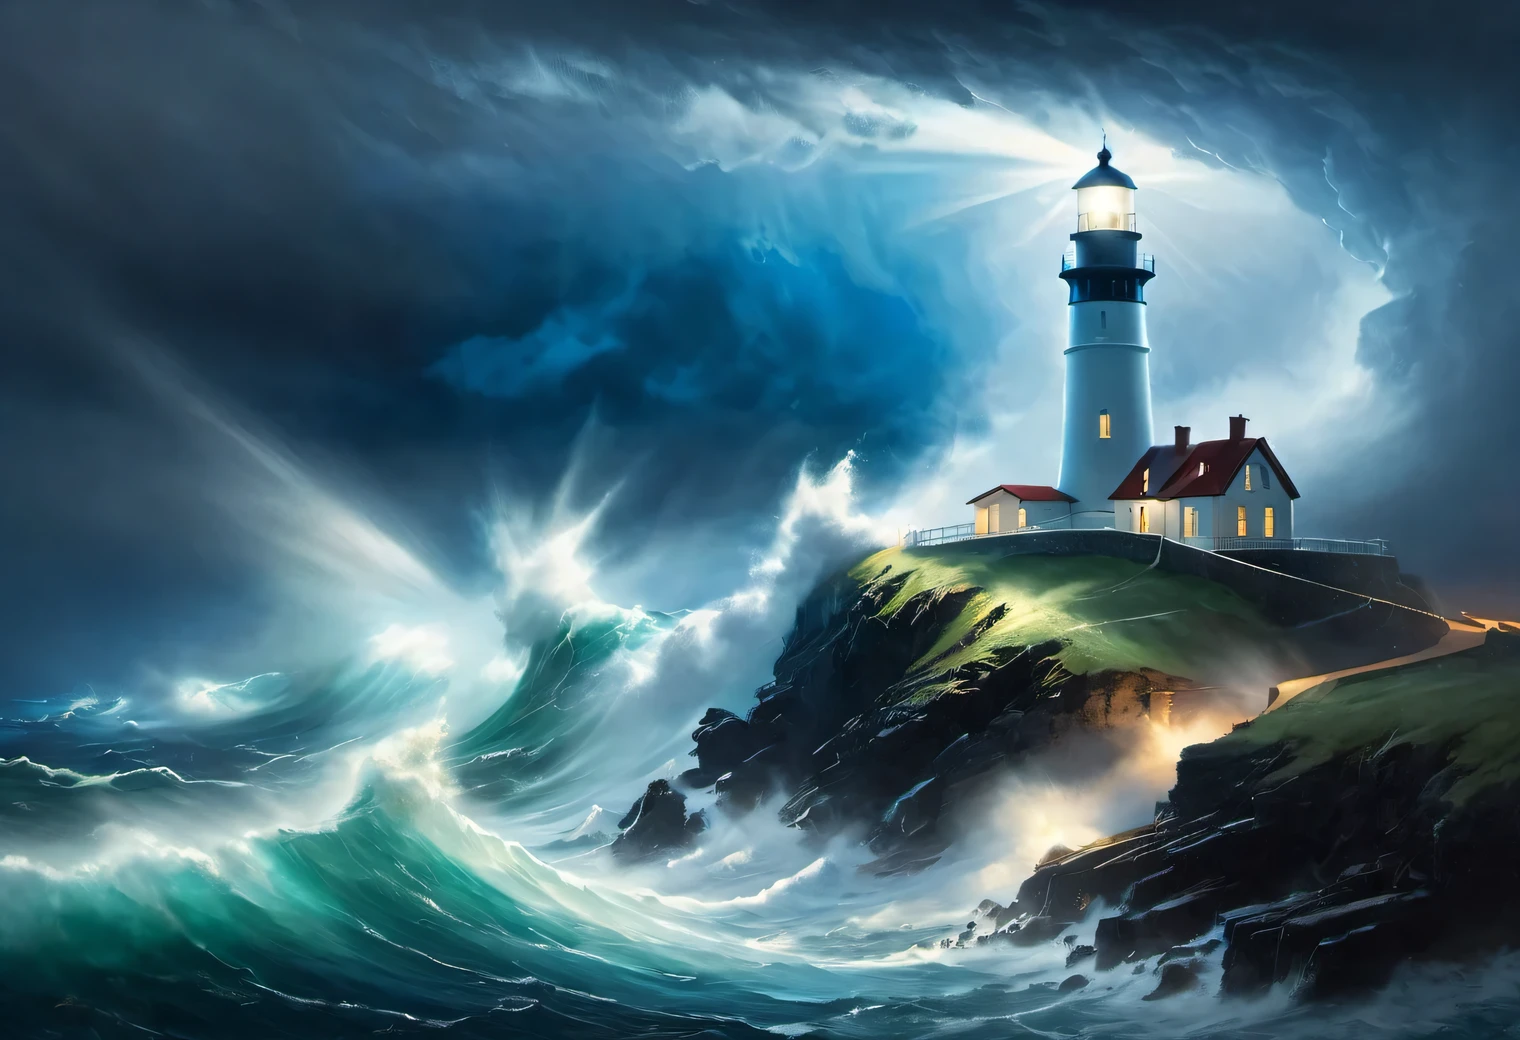 (dark green lighting Art:1.7050), Realistic painting in dark a stormy tones, (sea a storm fog: 1.2), (the wind carries sea spray and foam:1.7), the dark a stormy sky is illuminated by the pale light of a lighthouse, (Double exposure effect:1.5), (1 Lighthouse on the edge of a cliff:1.5 glows with bright blue rays: 1.3505), (a stormy sea: 1.755), Strong (a storm: 1.3050), Strong winds:1.250), Blue Highlight, (ray tracing: 1.2), (Tyndall effect: 1.4055 lighthouse beams:1.4), High detail, a storm haze, Texture smoothing, outline blur, a storm palette, Ivan Aivazovsky, in combination with (surrealism: 1.6), (the Strongest a storm of the century:1.5), (low visibility:1.7)